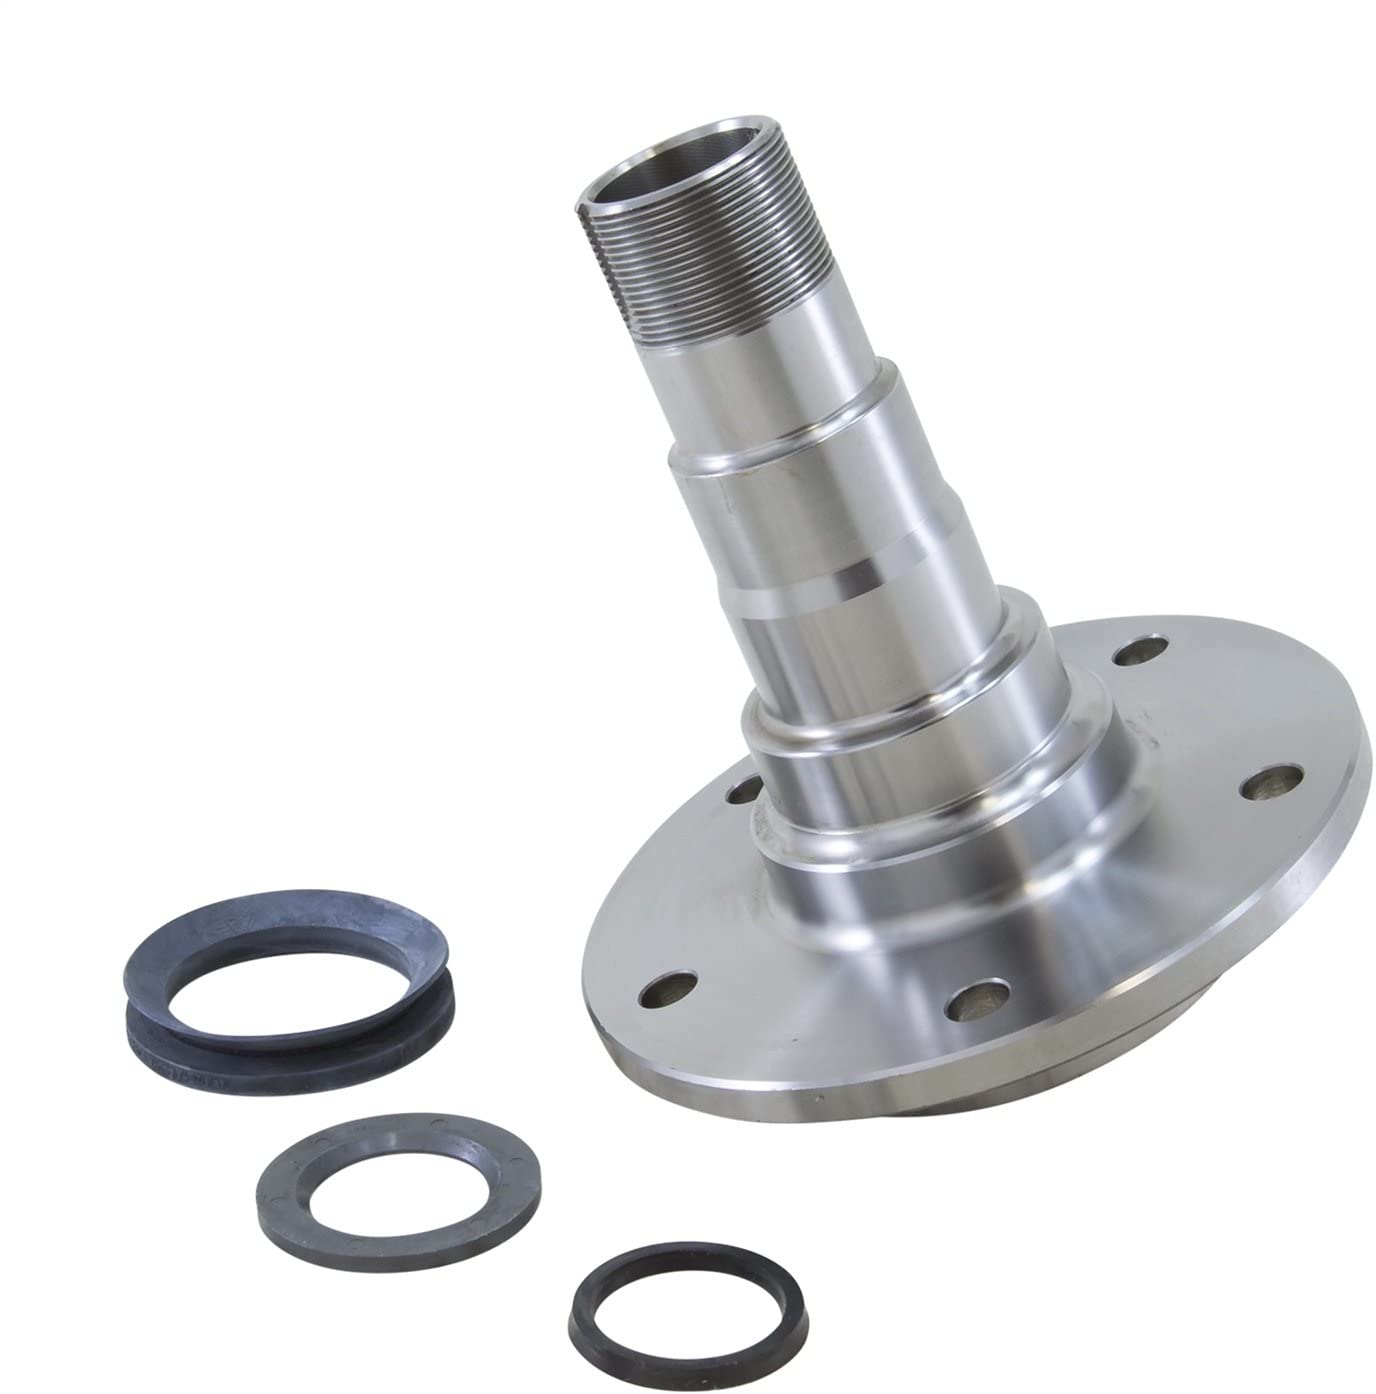 Yukon Gear & Axle (YA W38105) Front Spindle for International Scout HD Axle with Disc Brakes